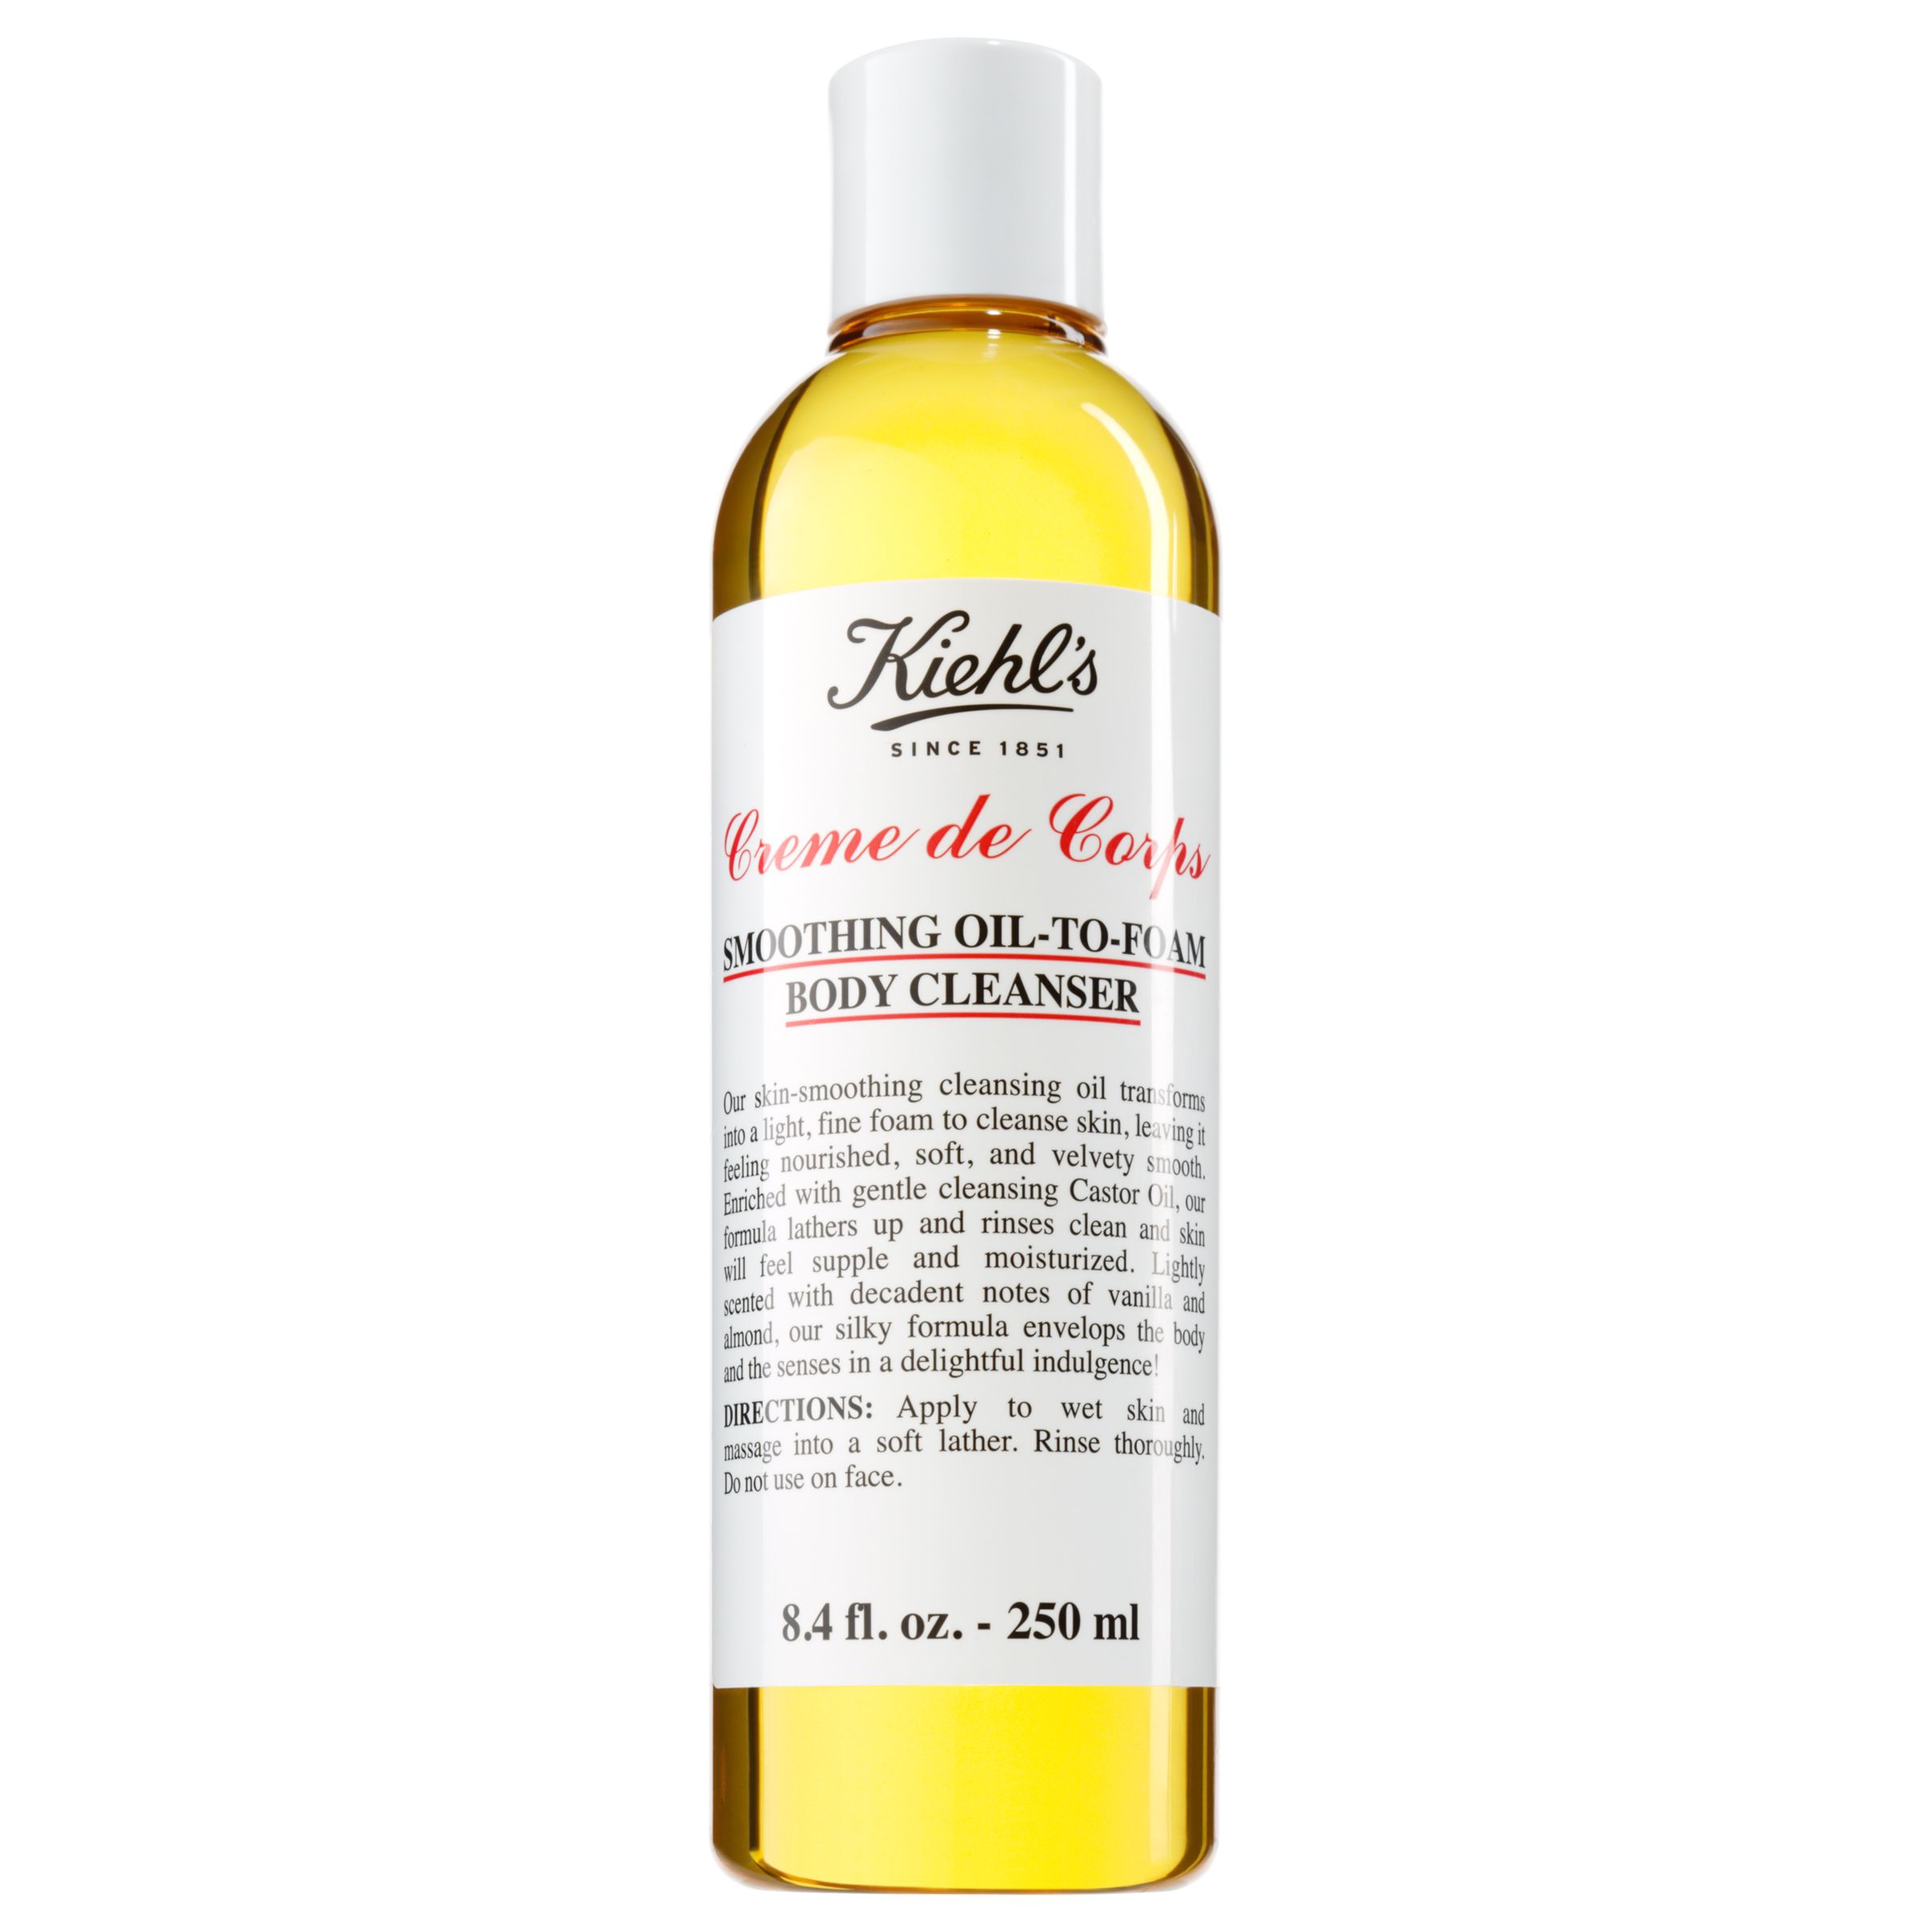 Kiehl's Creme de Corps Smoothing Oil-To-Foam Body Cleanser, 250ml